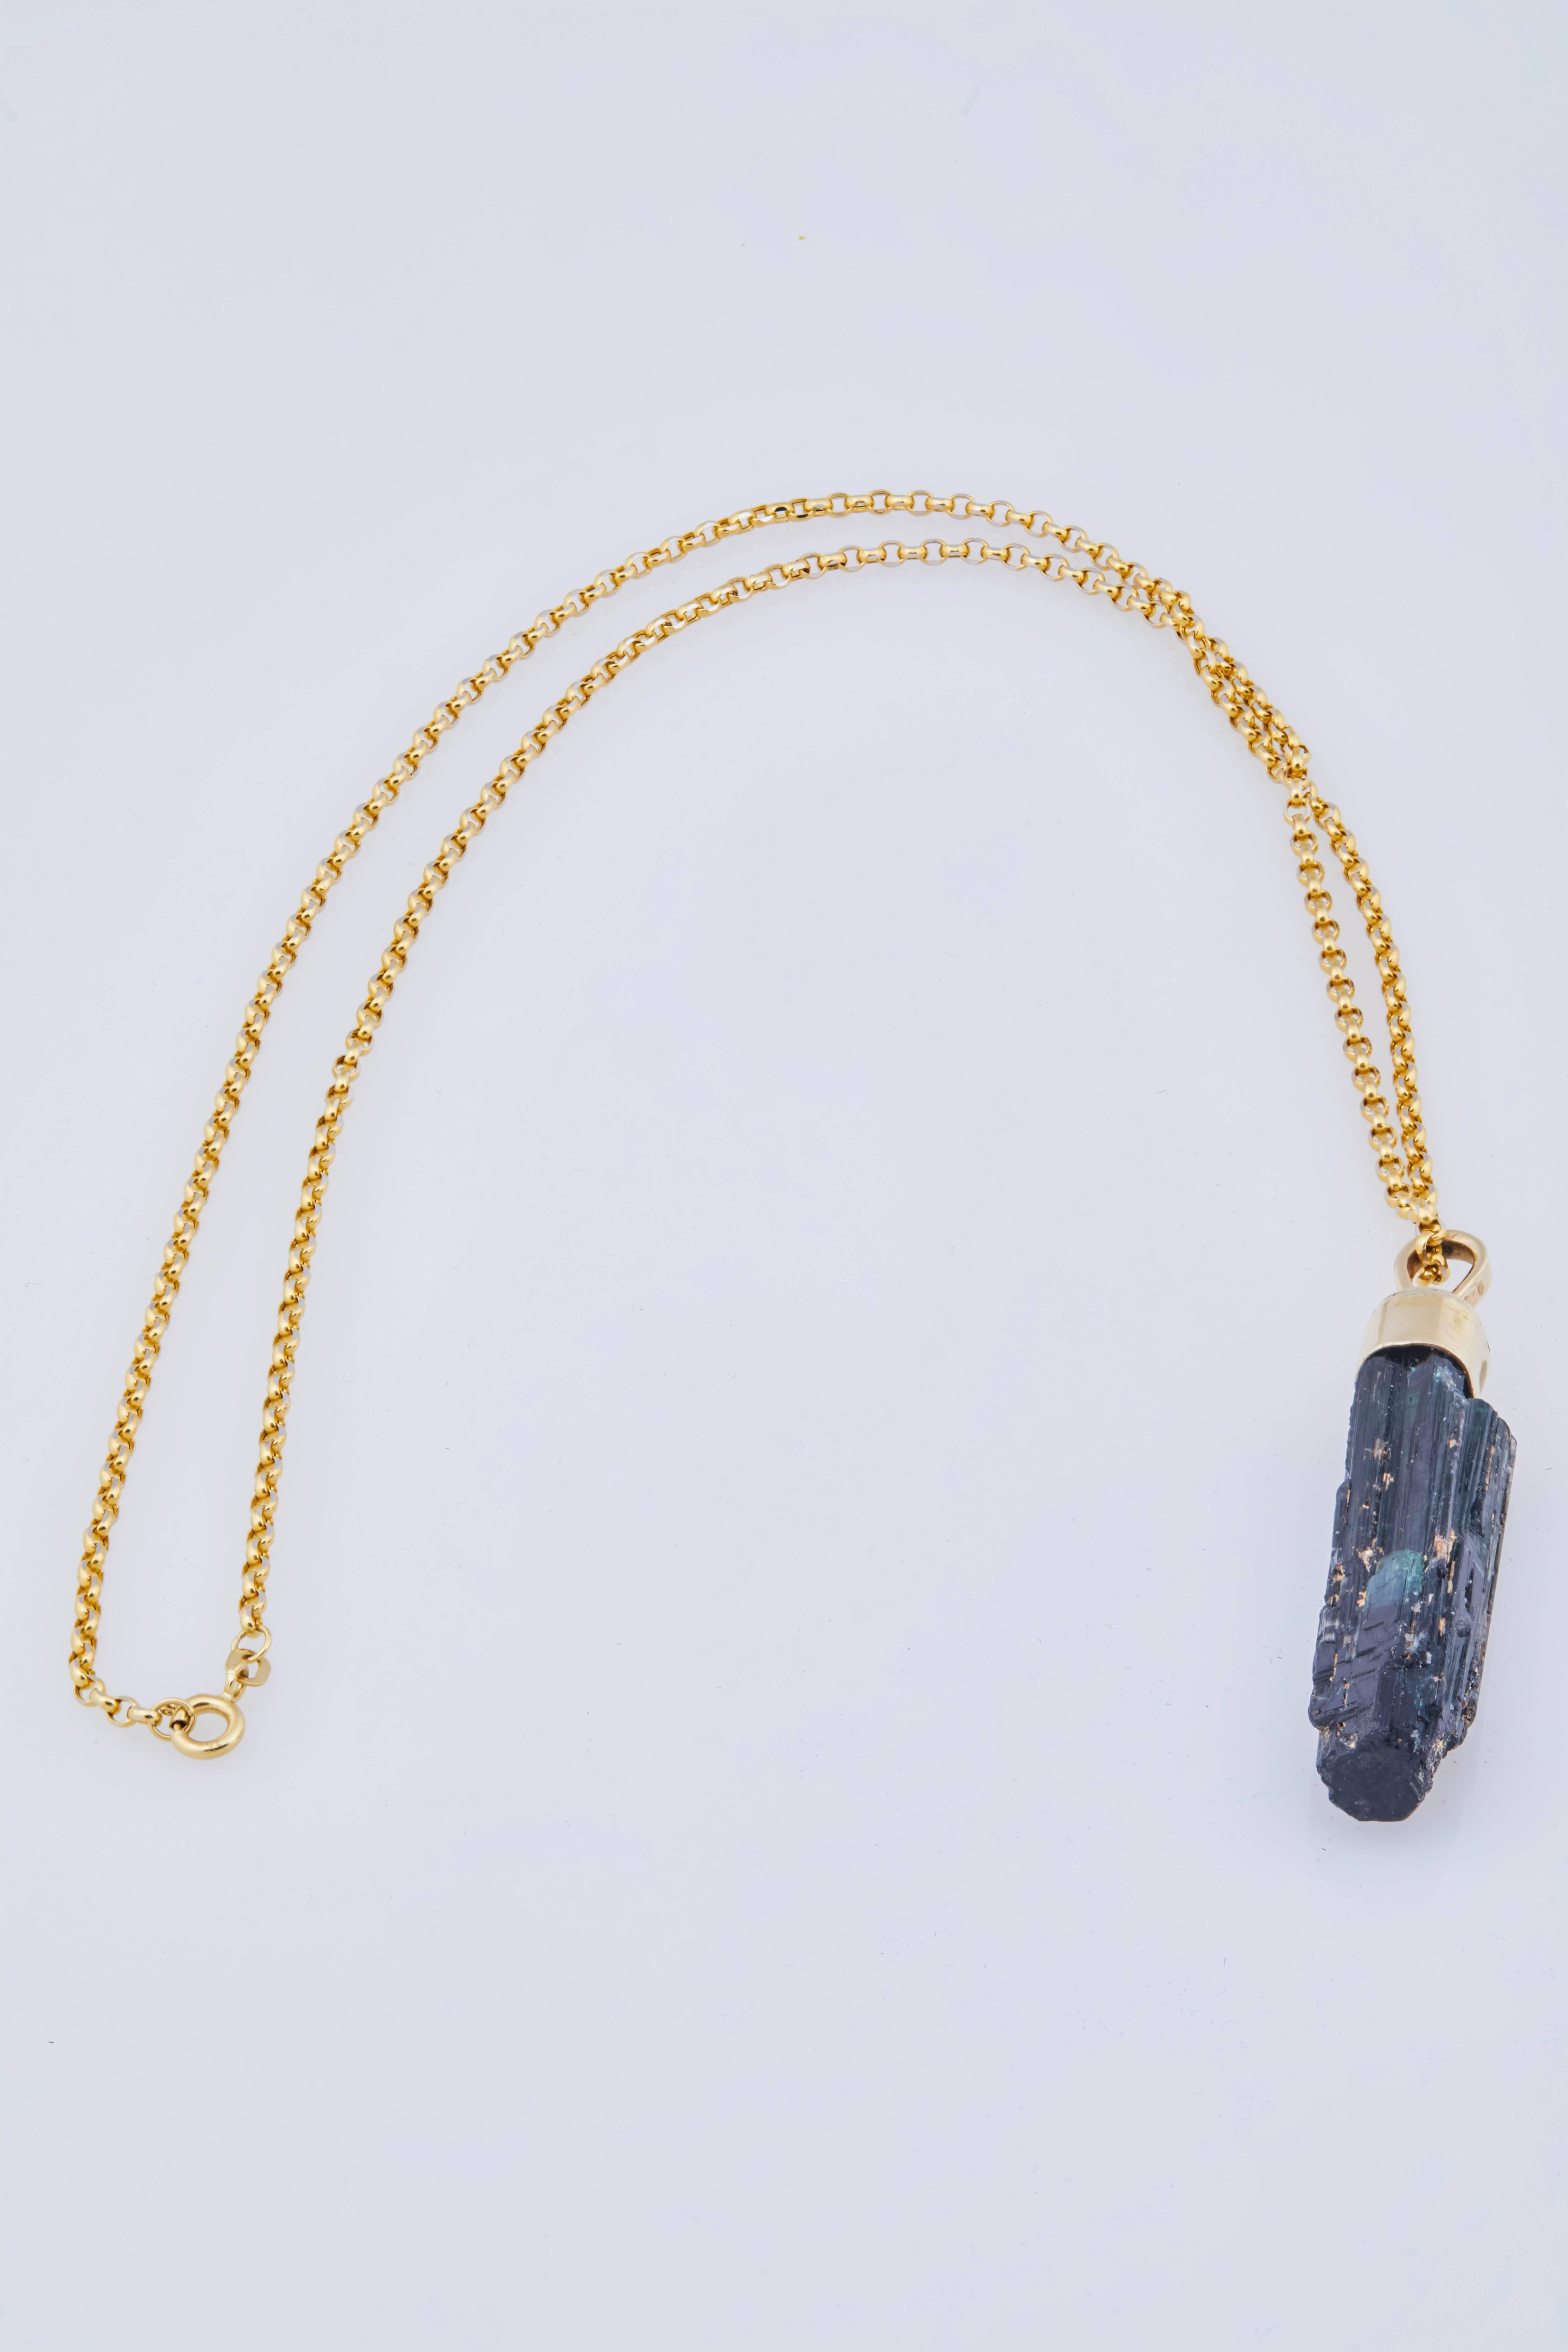 Natural Tourmaline Mounted in 18k Gold on Italian 18k Gold Chain 1